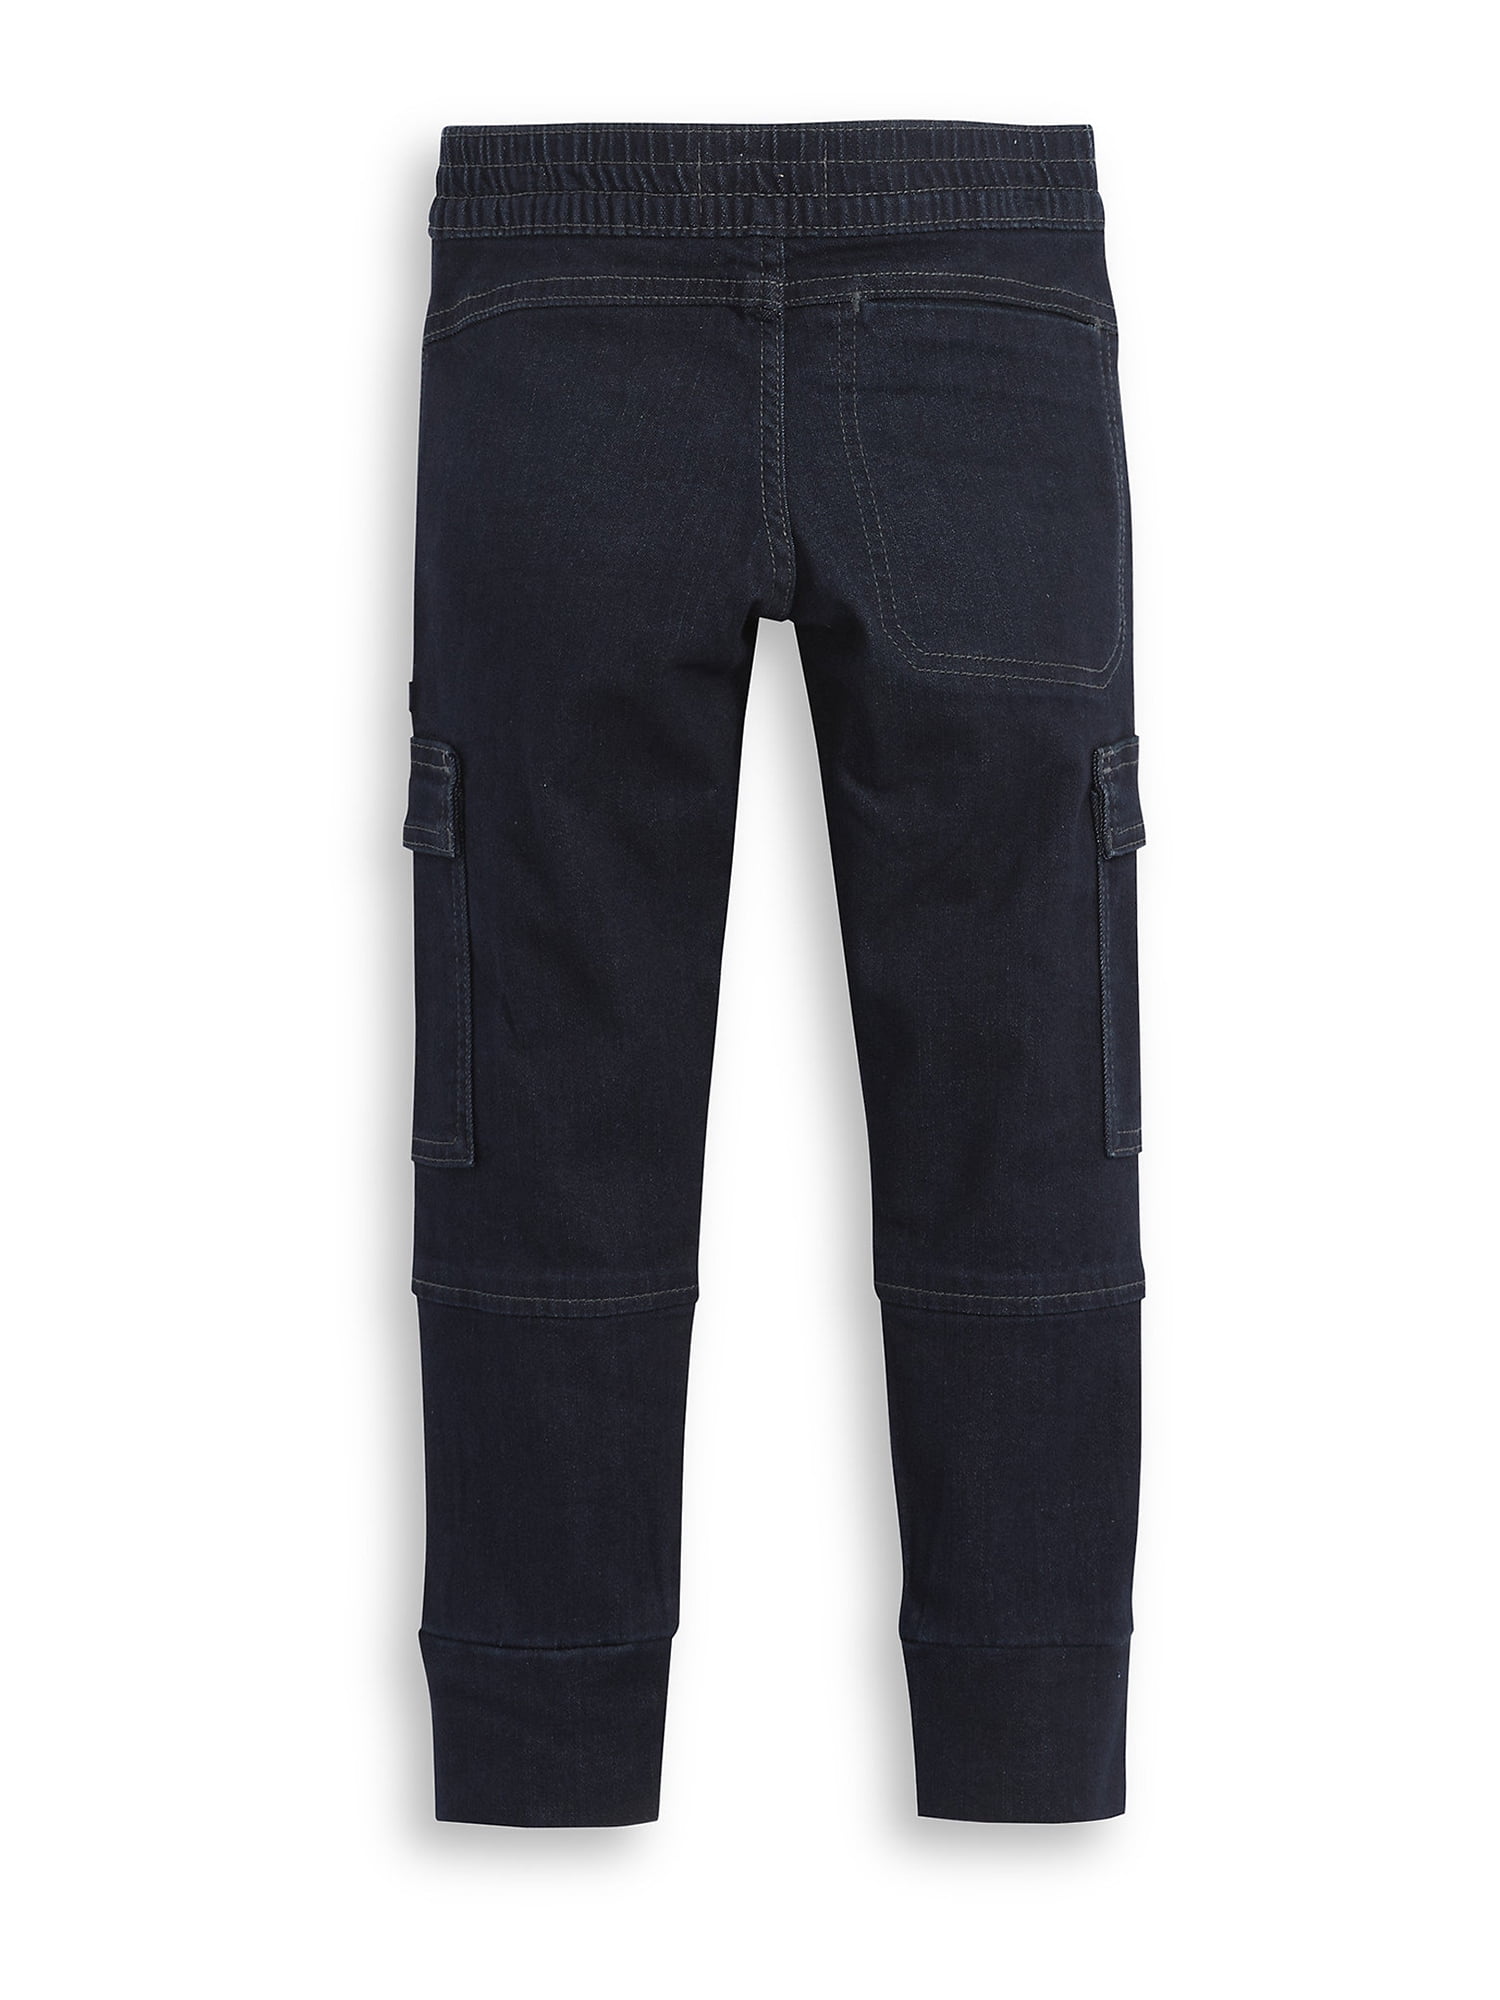 Signature by Levi Strauss & Co. Boys Cargo Jogger Jeans 